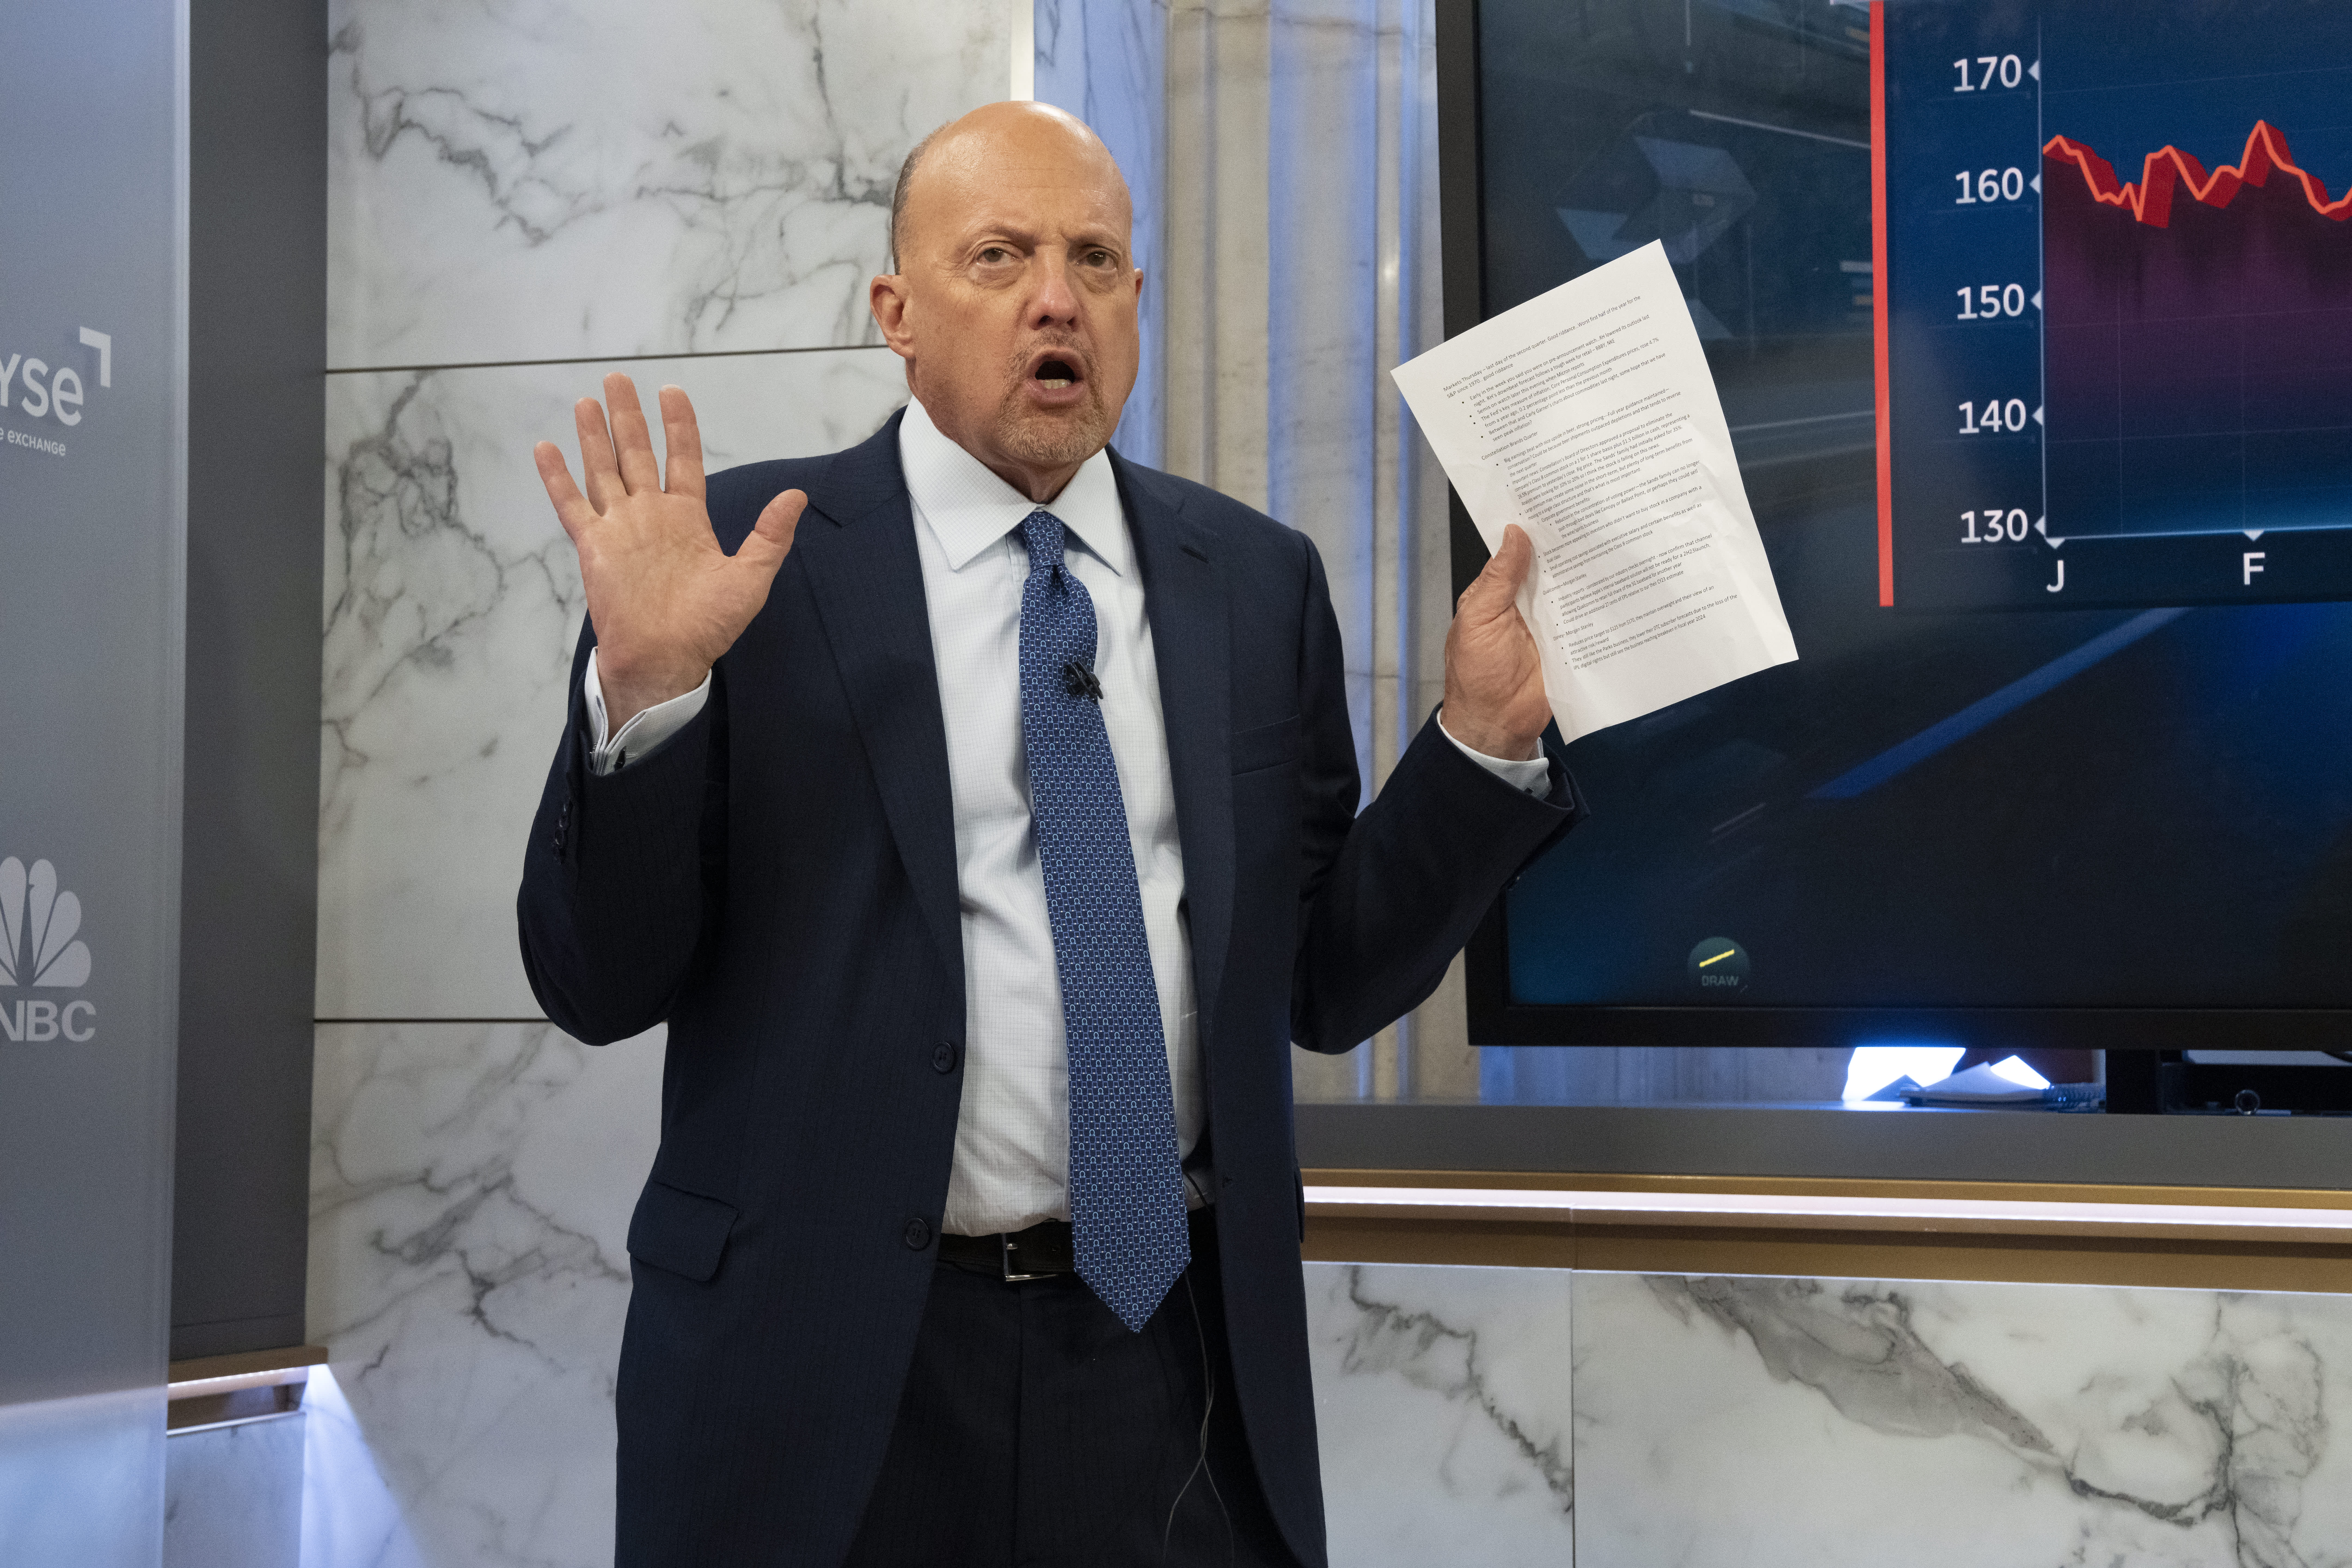 Jim Cramer's Investing Club meeting Friday: Hot jobs report, Marvell earnings read through